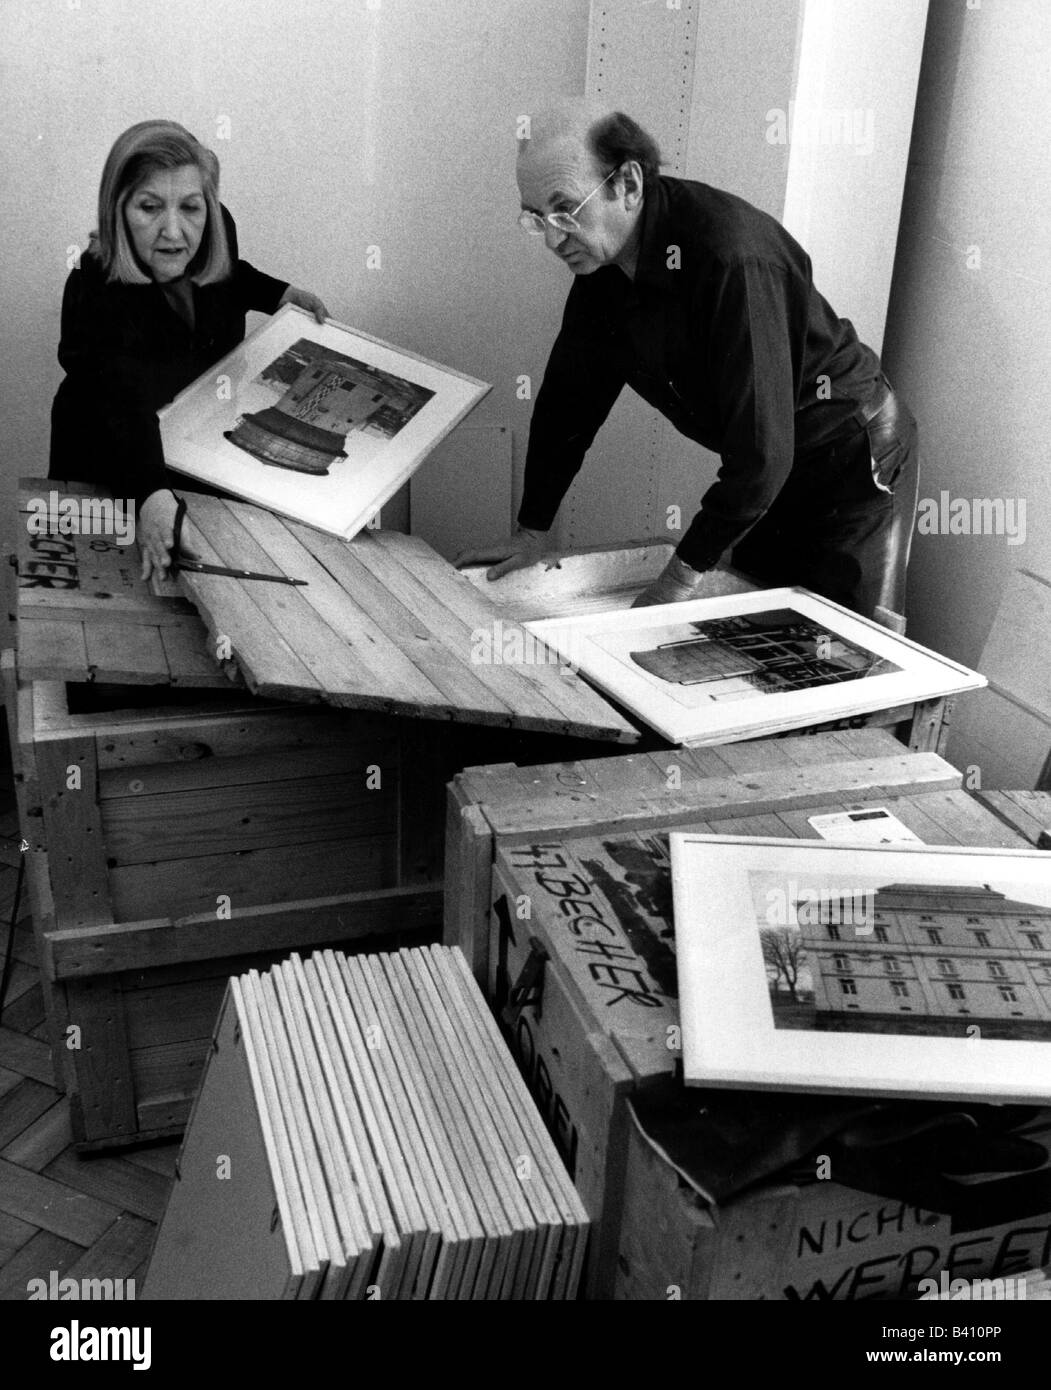 Becher, Bernd and Hilla, Bernd, 20.8.1931 - 22.6.2007, Hilla, 2.9.1934 - 10.10.2015, German artists, (photographers), half length, packing framed copies of their industry photographs into boxes, circa 1996, Stock Photo